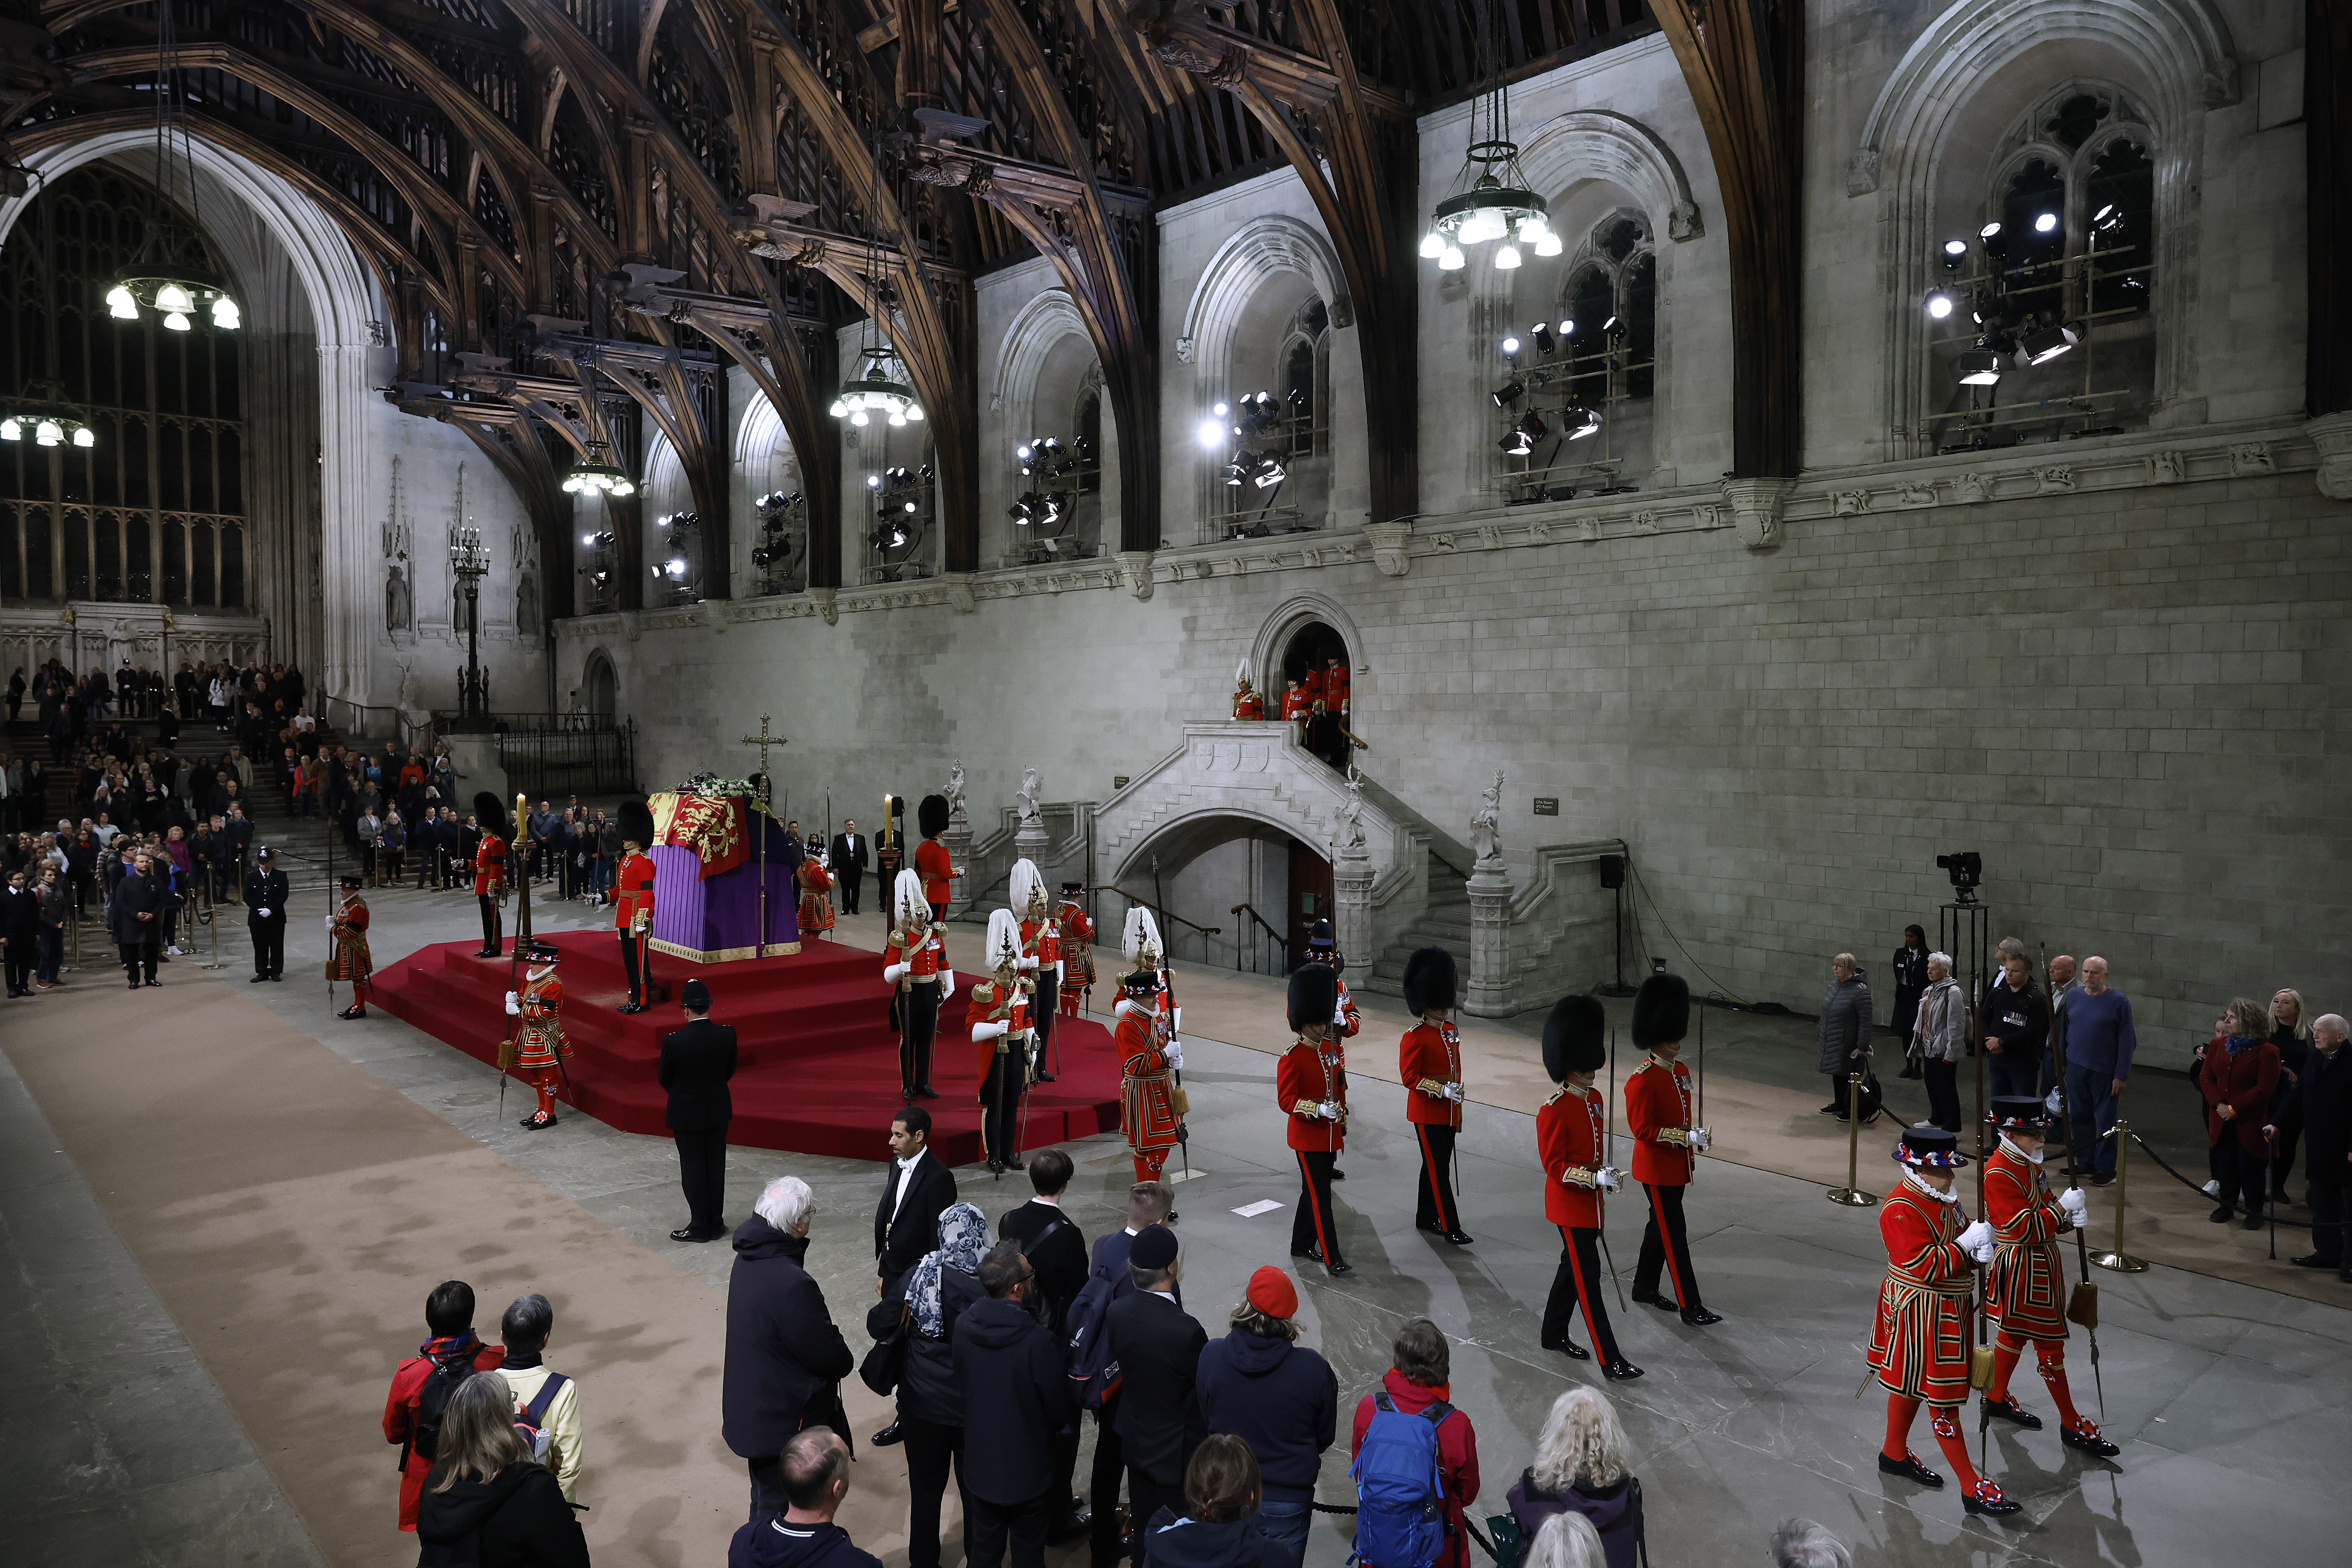 The Changing of the Guard takes place as people wait to walk past the coffin of Queen Elizabeth II as it lies in state on the catafalque in Westminster Hall, at the Palace of Westminster, London, early Saturday Sept. 17, 2022. The Queen will lie in state in Westminster Hall for four full days before her funeral on Monday Sept. 19. (Chip Somodevilla/Pool via AP)